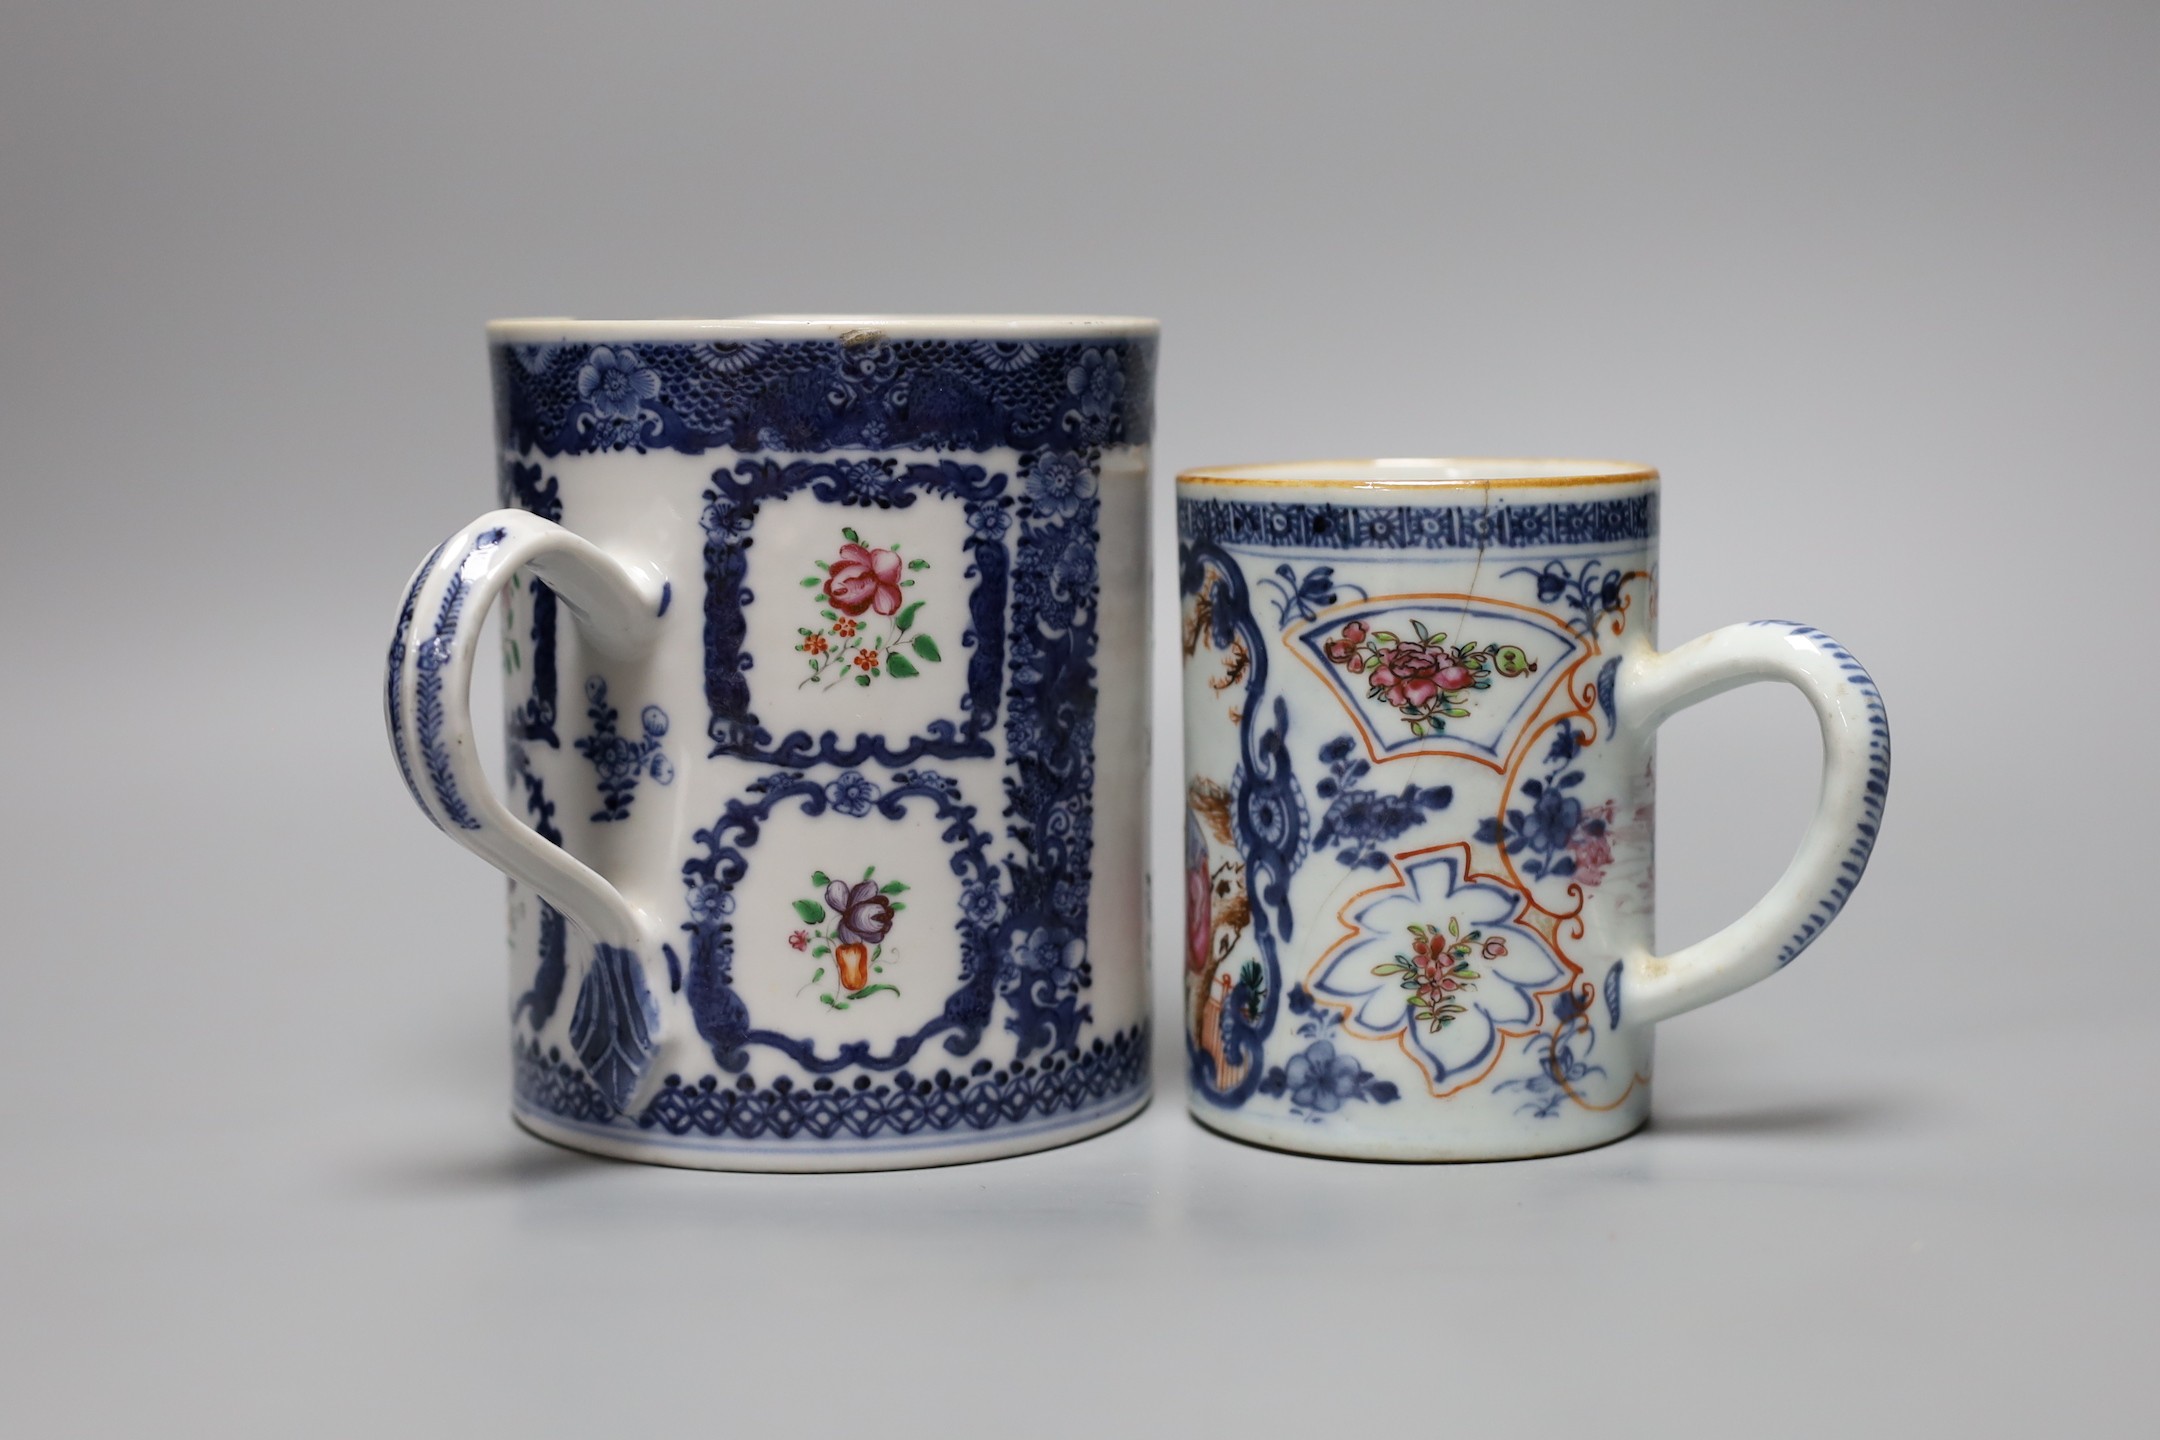 Two 18th century Chinese export tankards, tallest 14cm